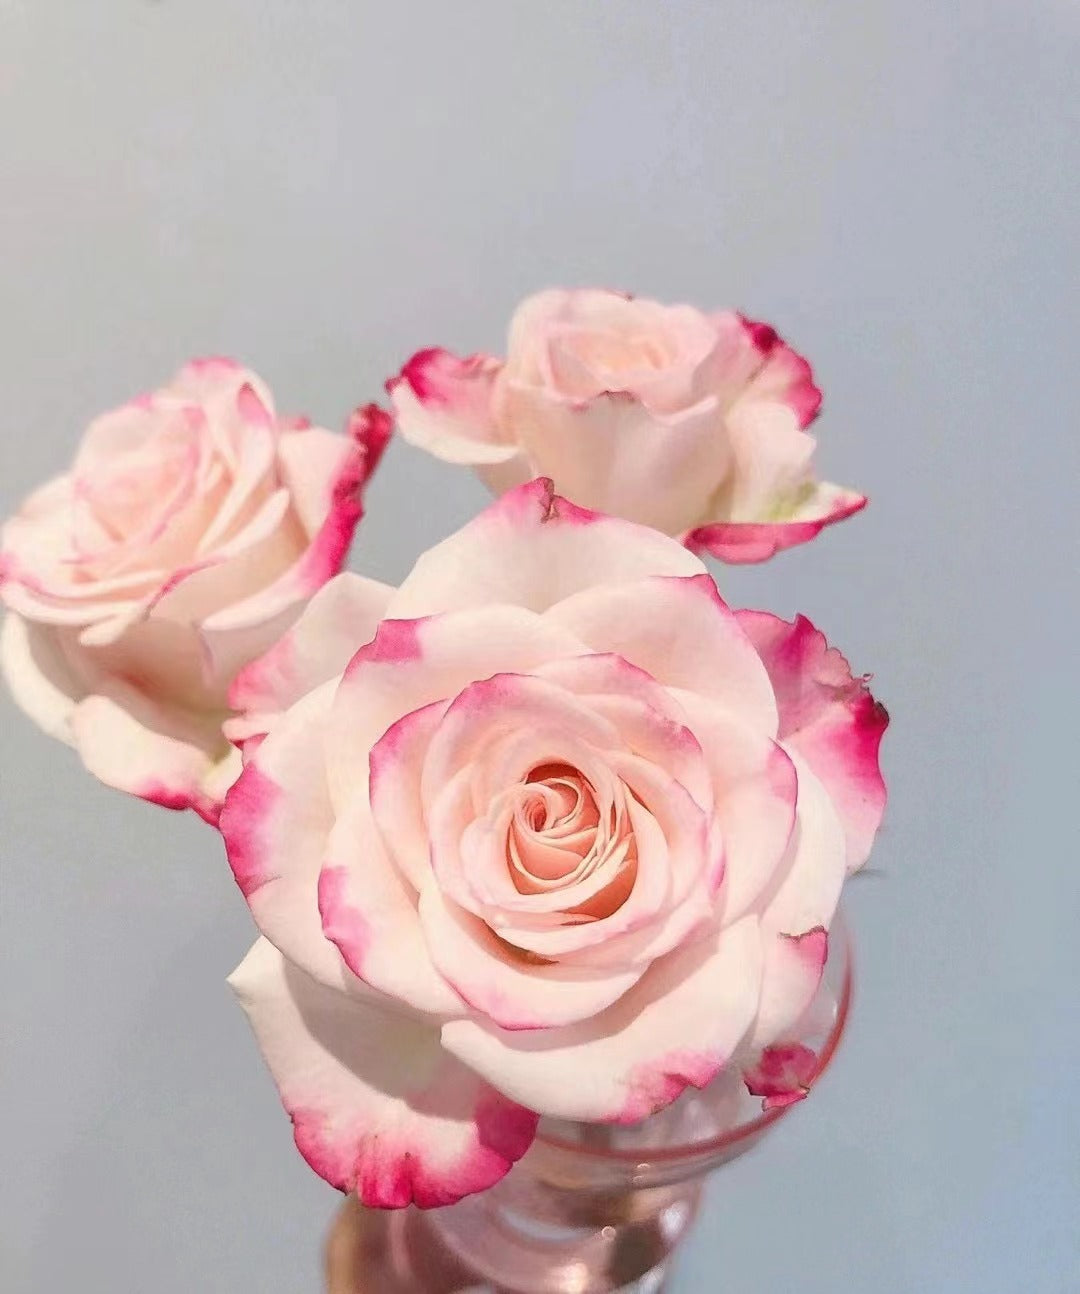 Rare Rose【Reflex】 - 1.5 Gal OwnRoot| 折射泡泡| Heat Resistant | Extended vase life| Wavy Bloom |木立バラ|